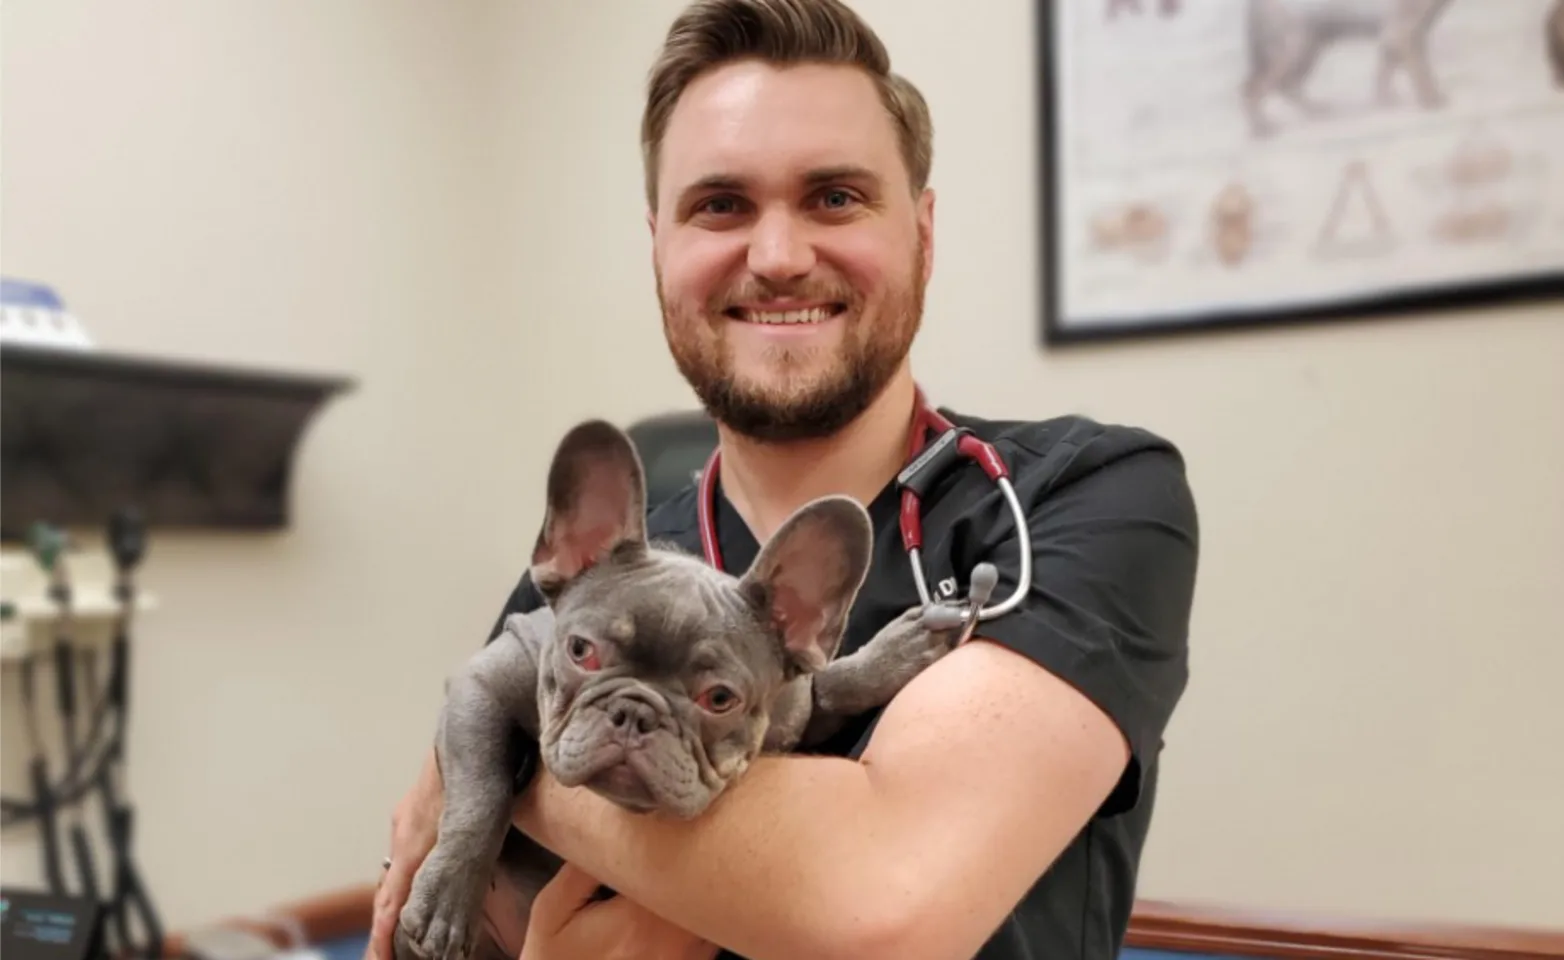 Staff member holding a gray bulldog with big ears